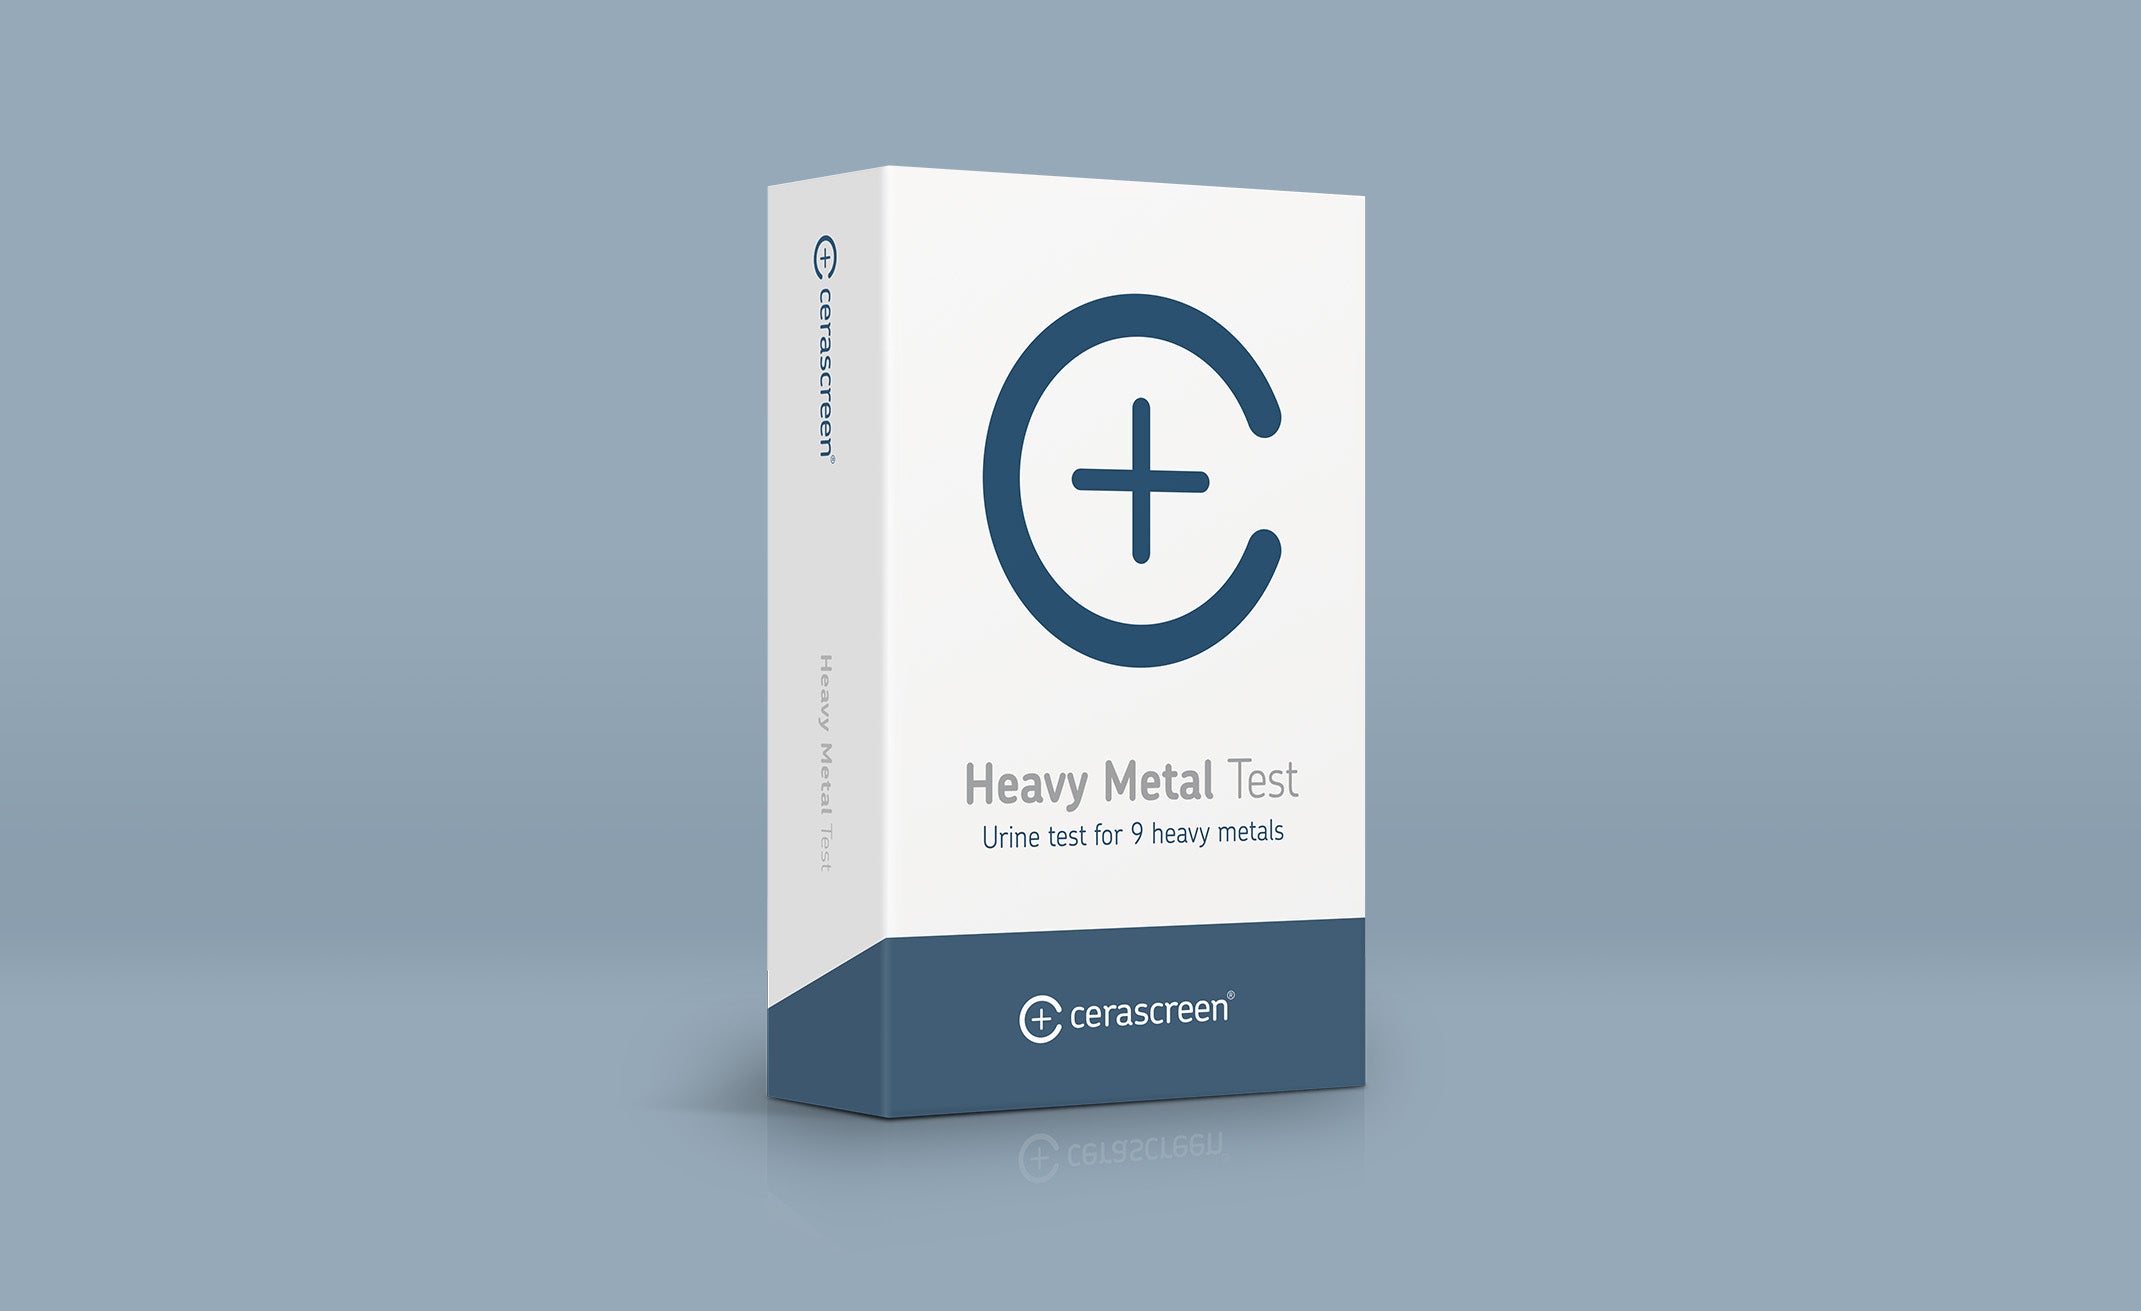 Heavy Metal Test - Home urine test kit for 9 metals